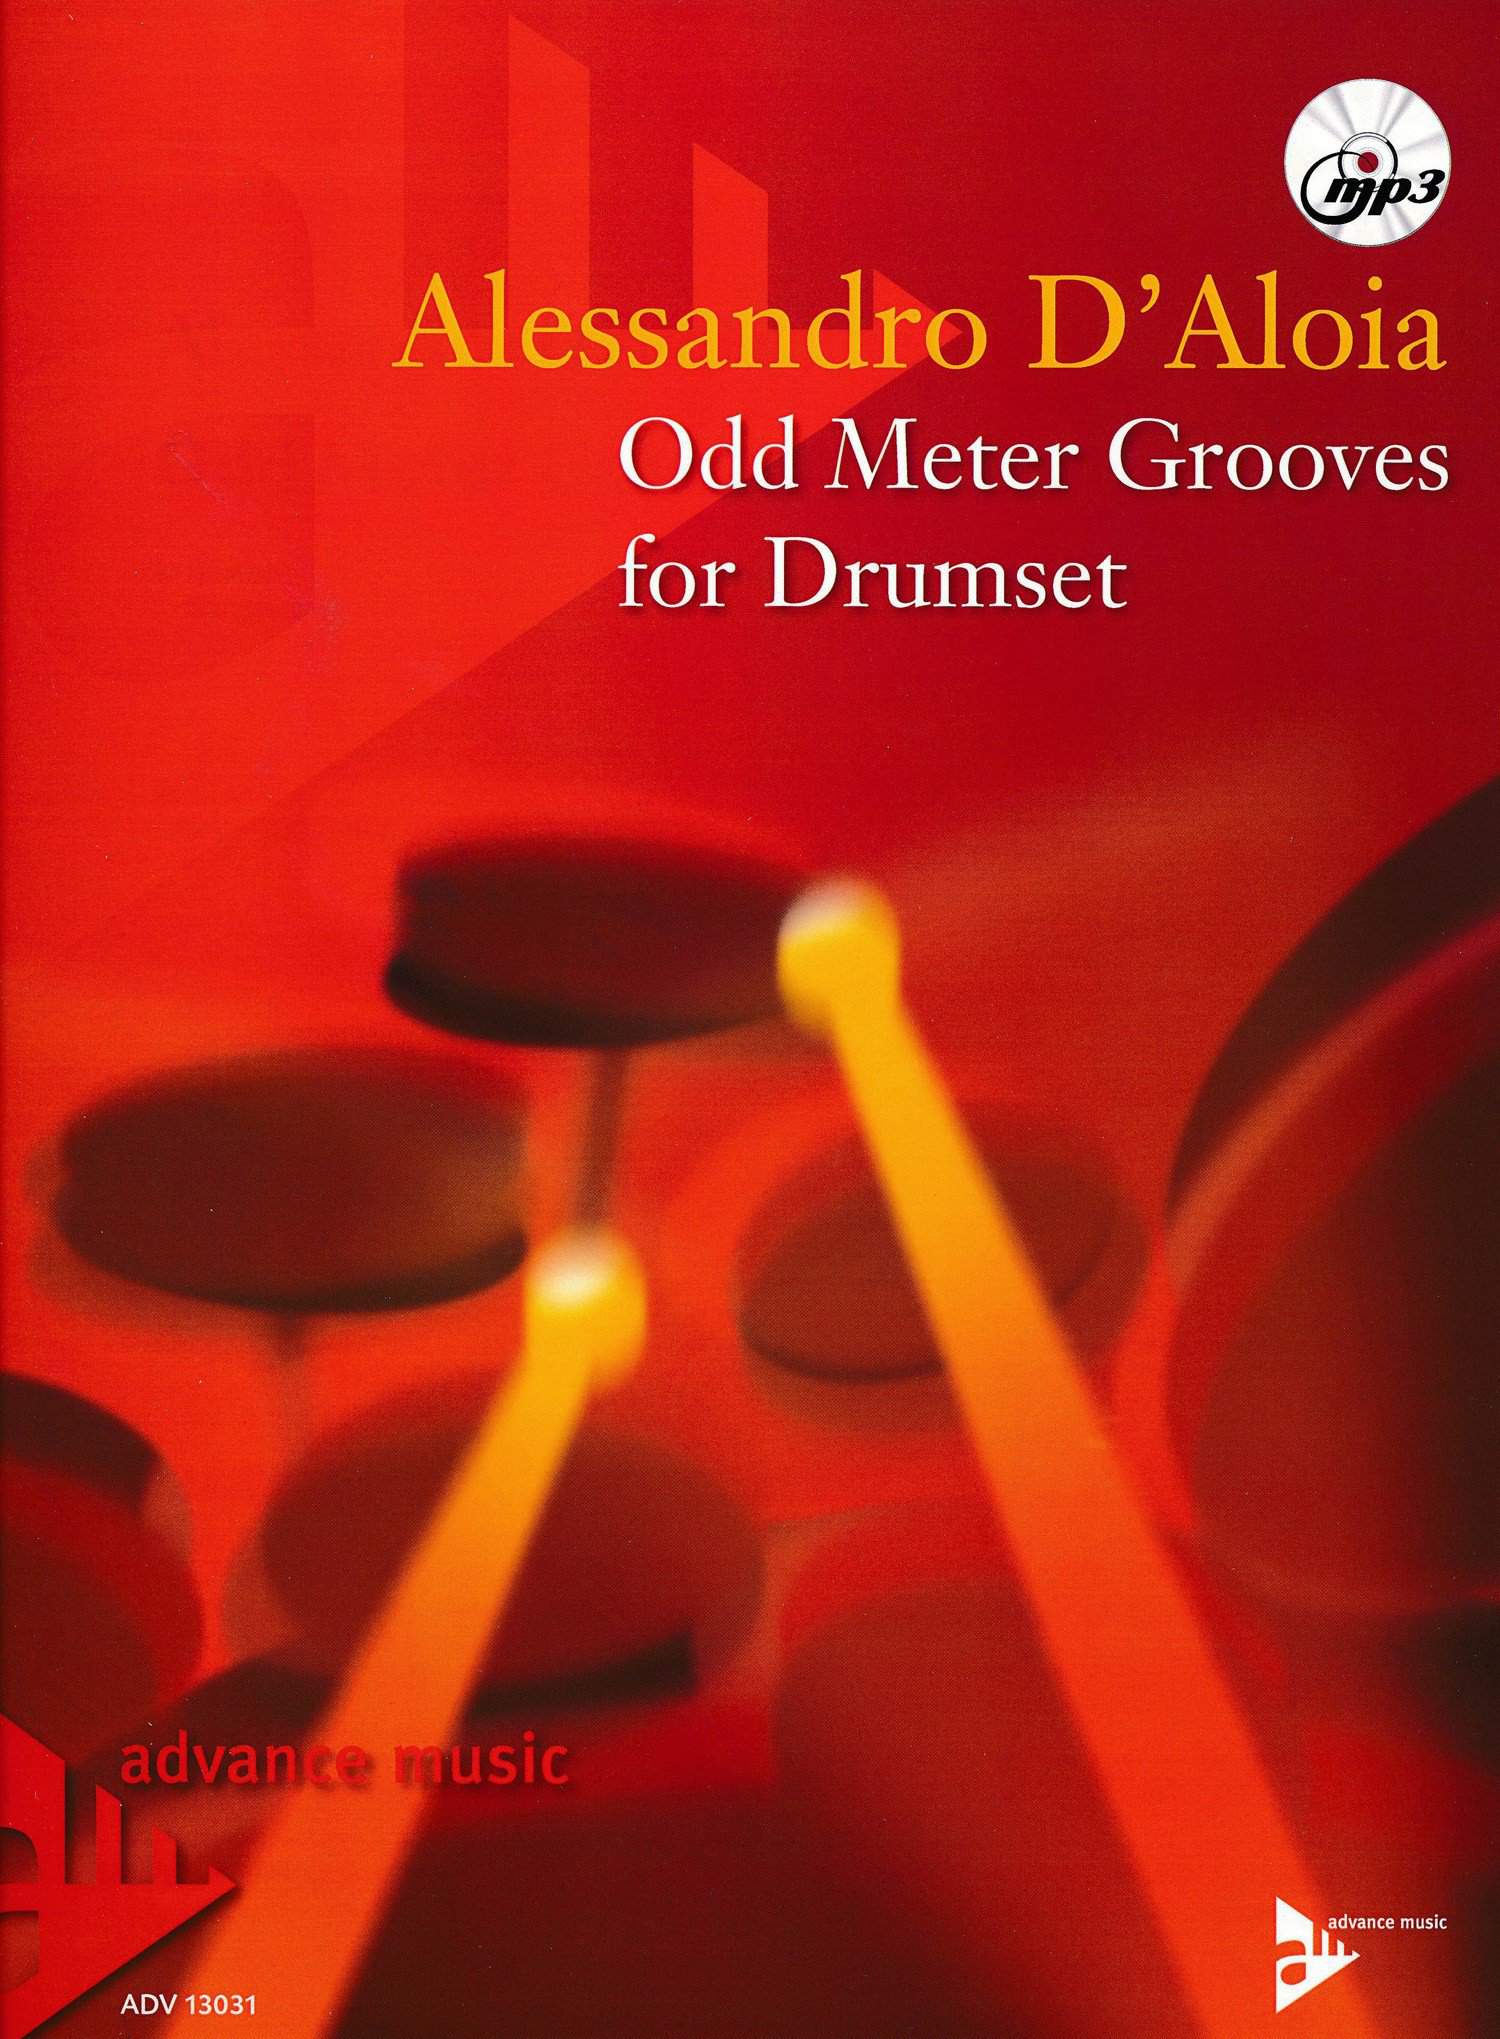 Odd Meter Grooves by Alessandro D'Aloia